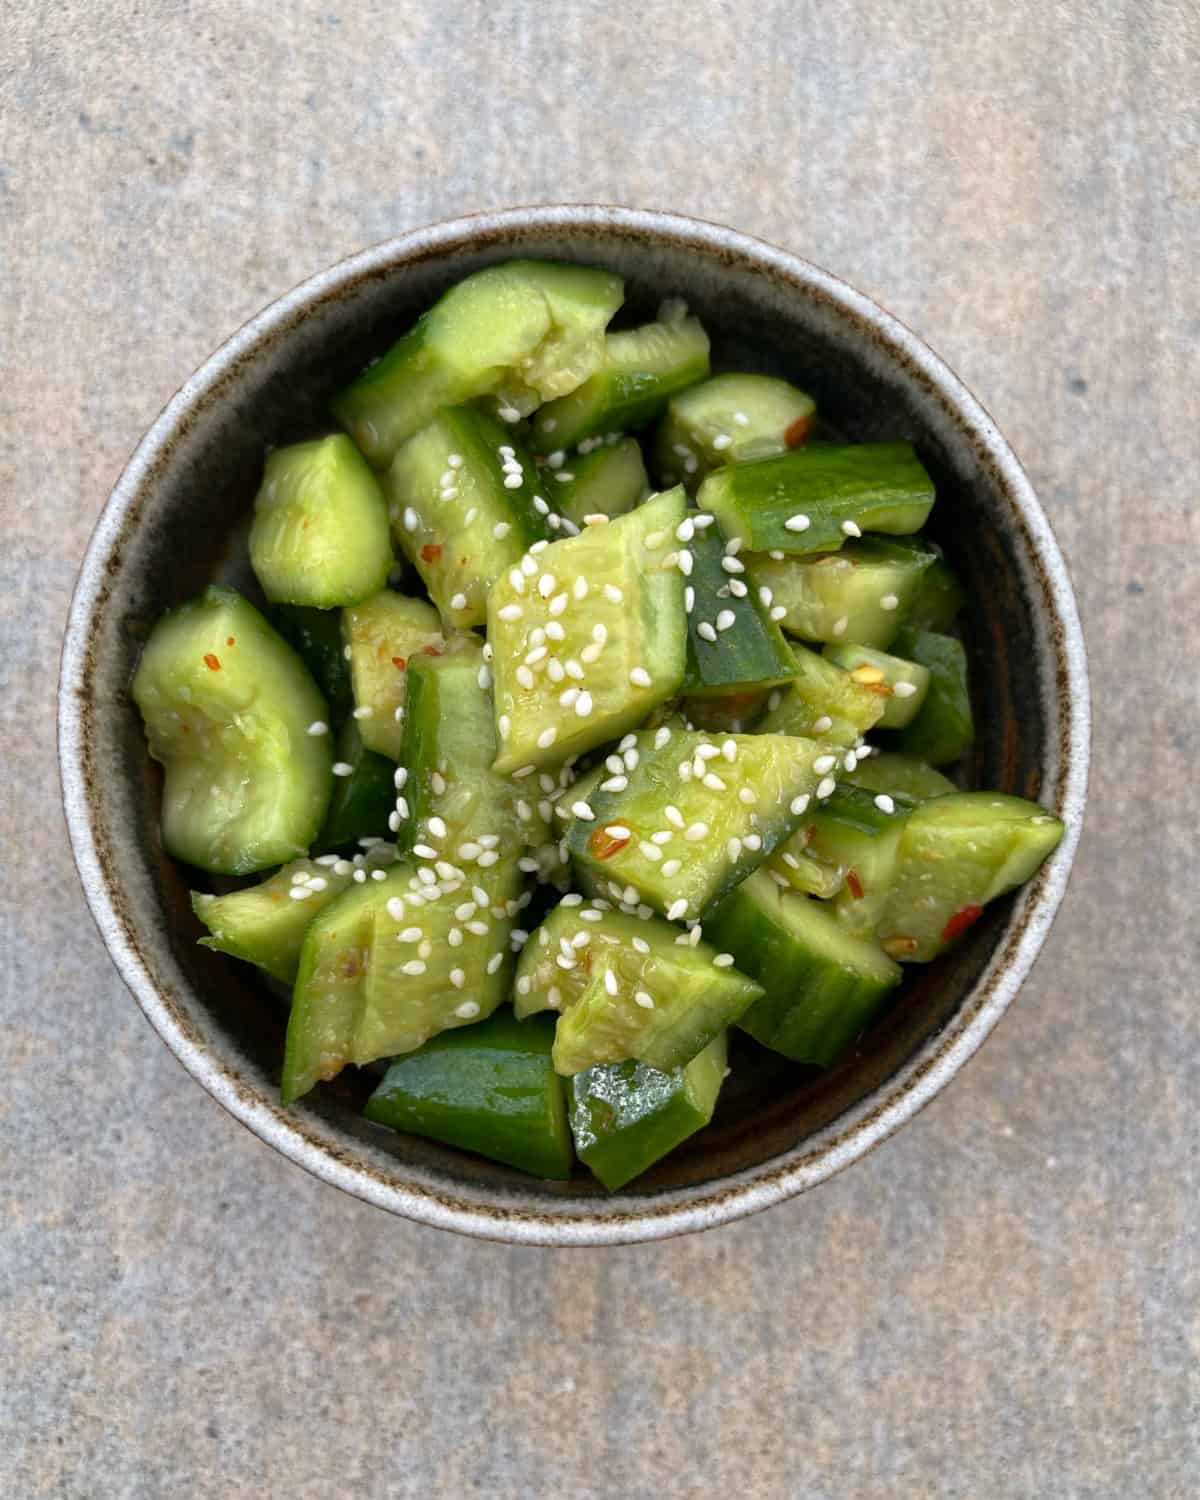 Chili spiced cucumber salad topped with toasted sesame seeds in ceramic bowl.